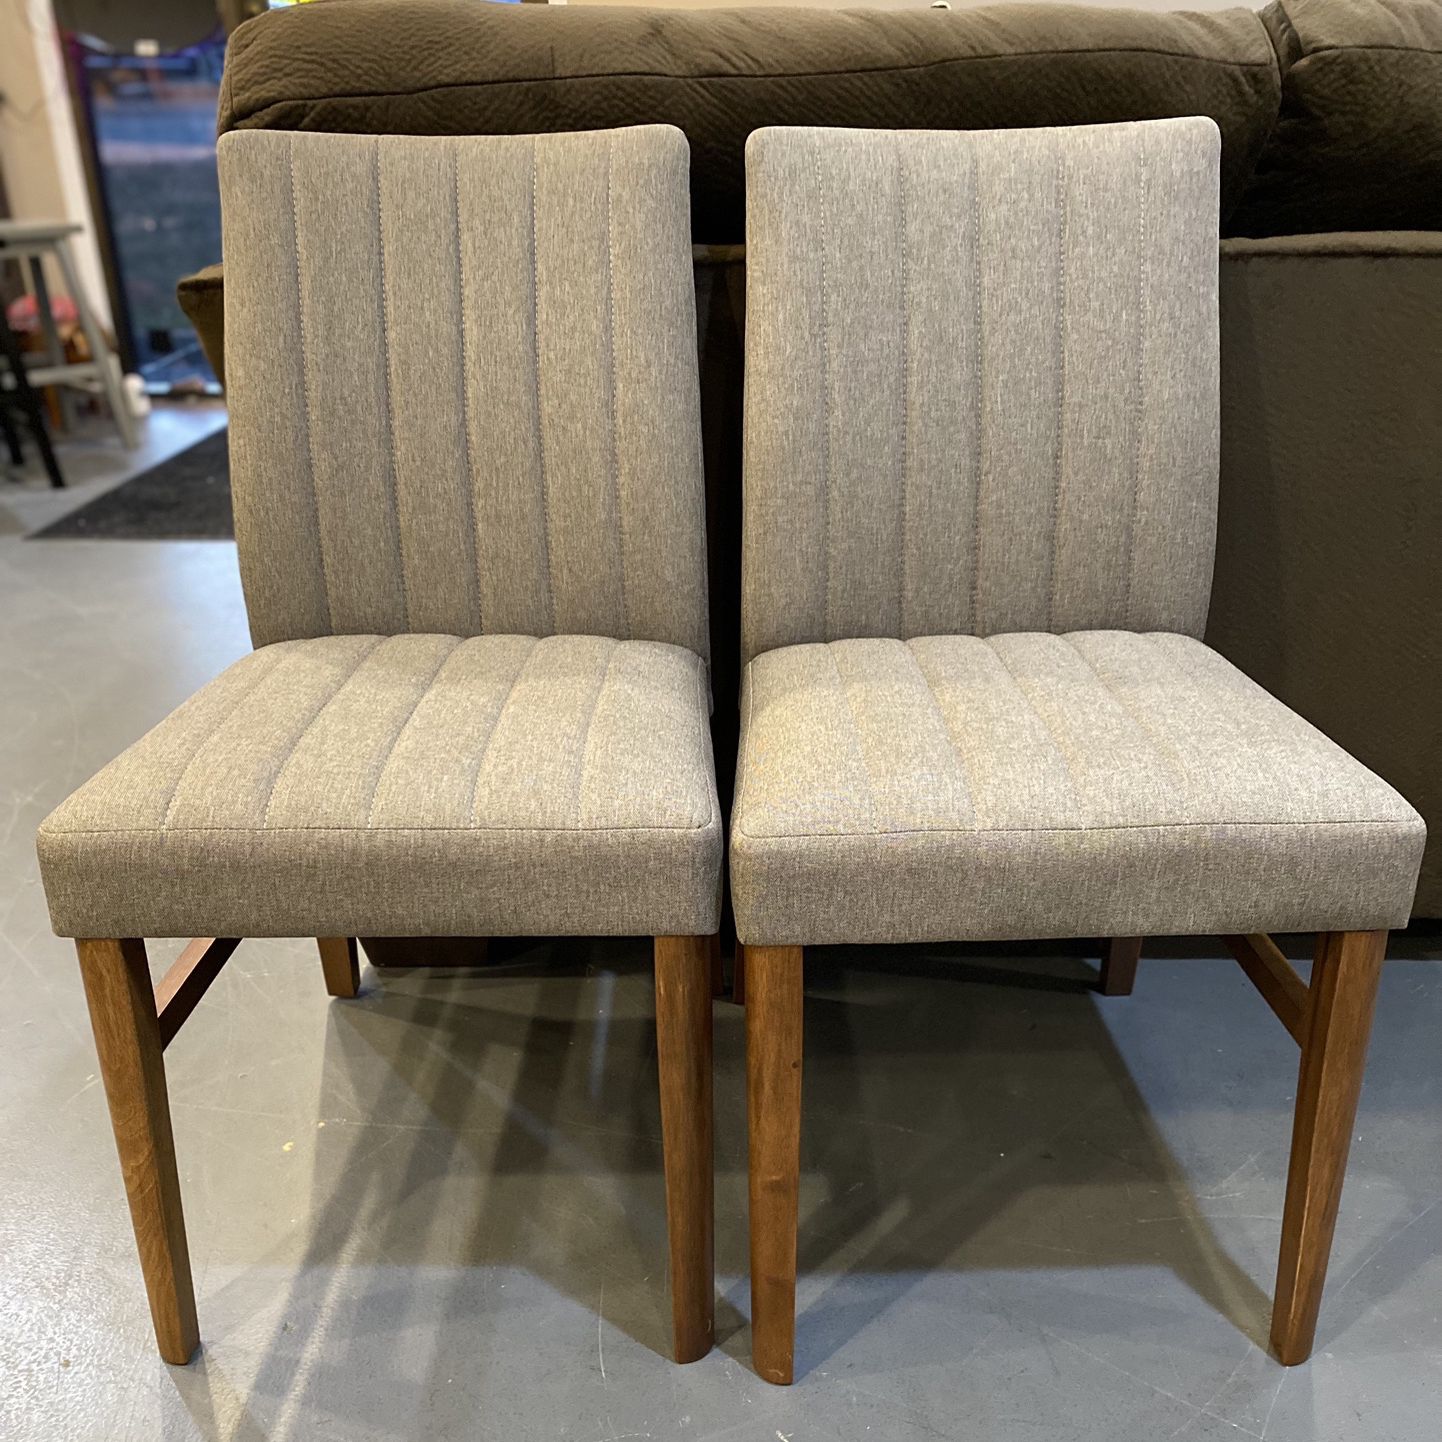 New Dining Chair Set (2)